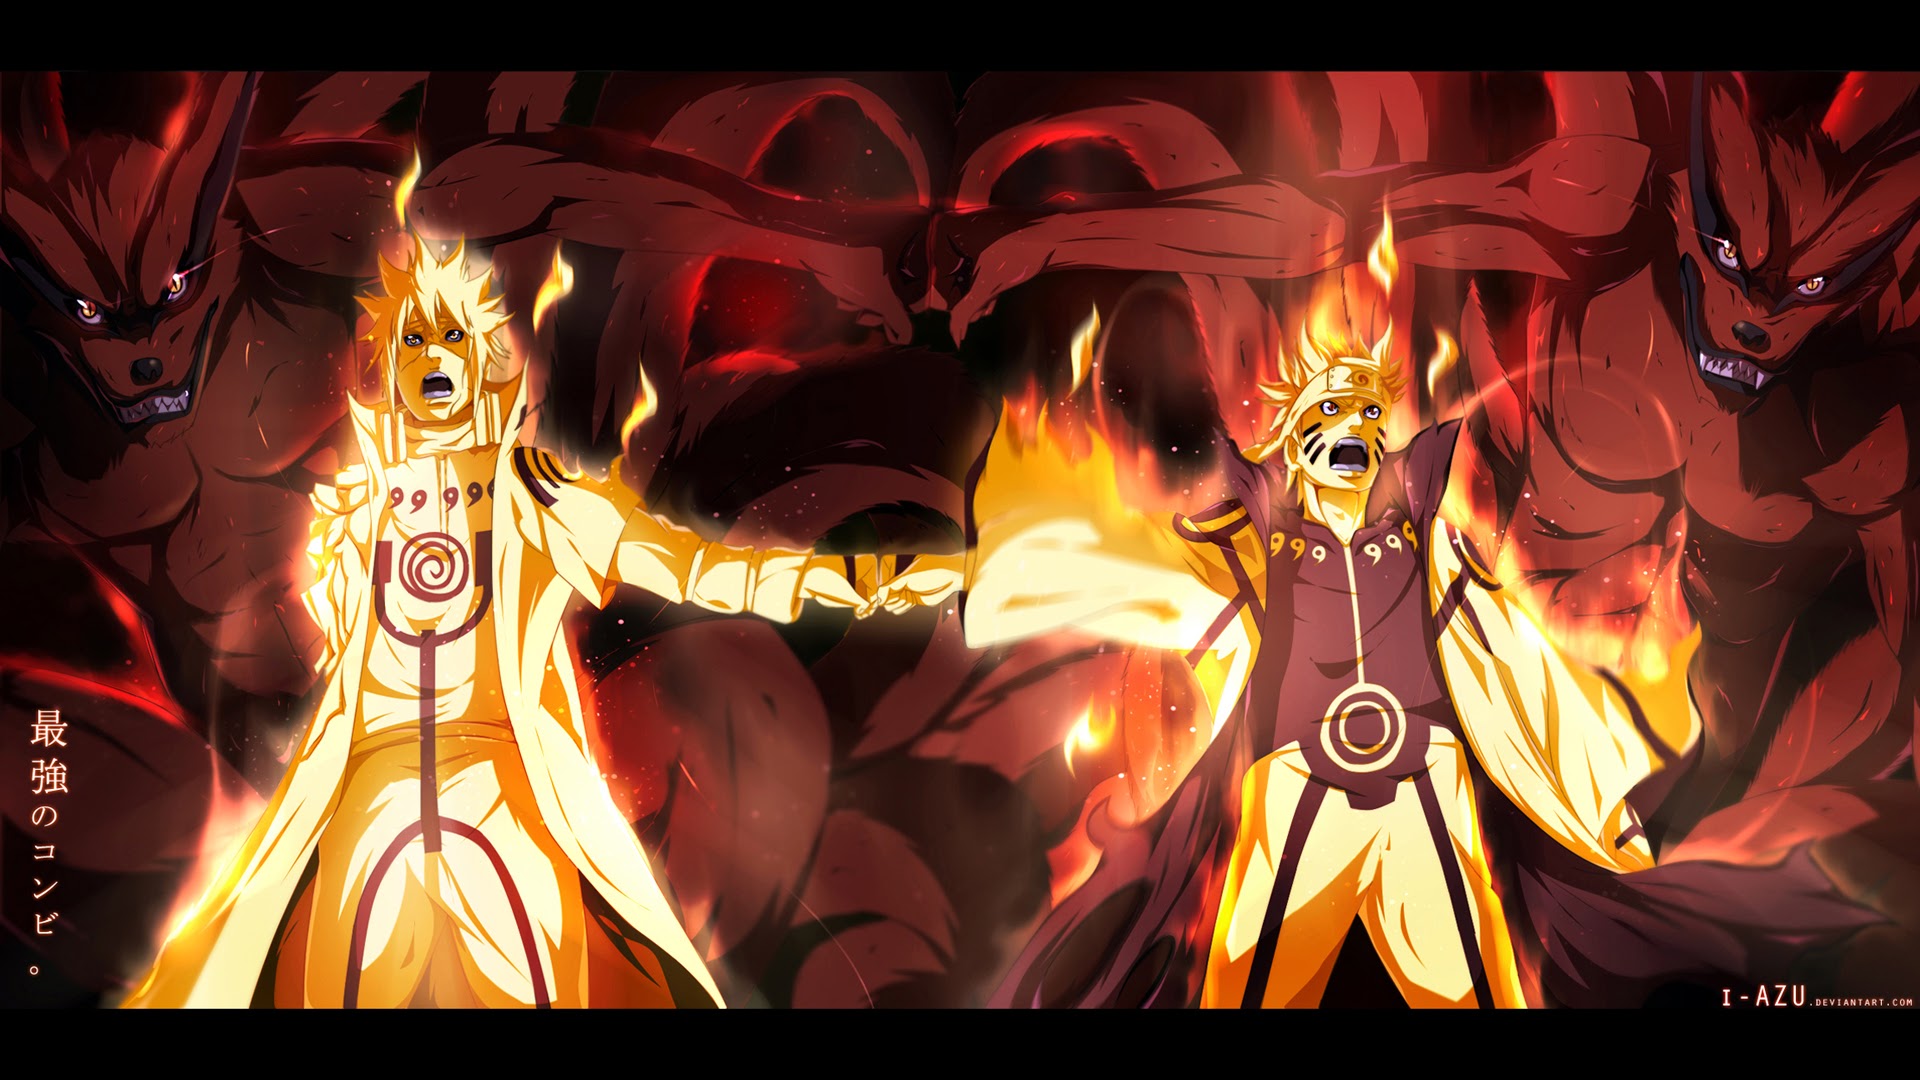 Naruto 2048 Pixels Wide And 1152 Pixels Tall Anime